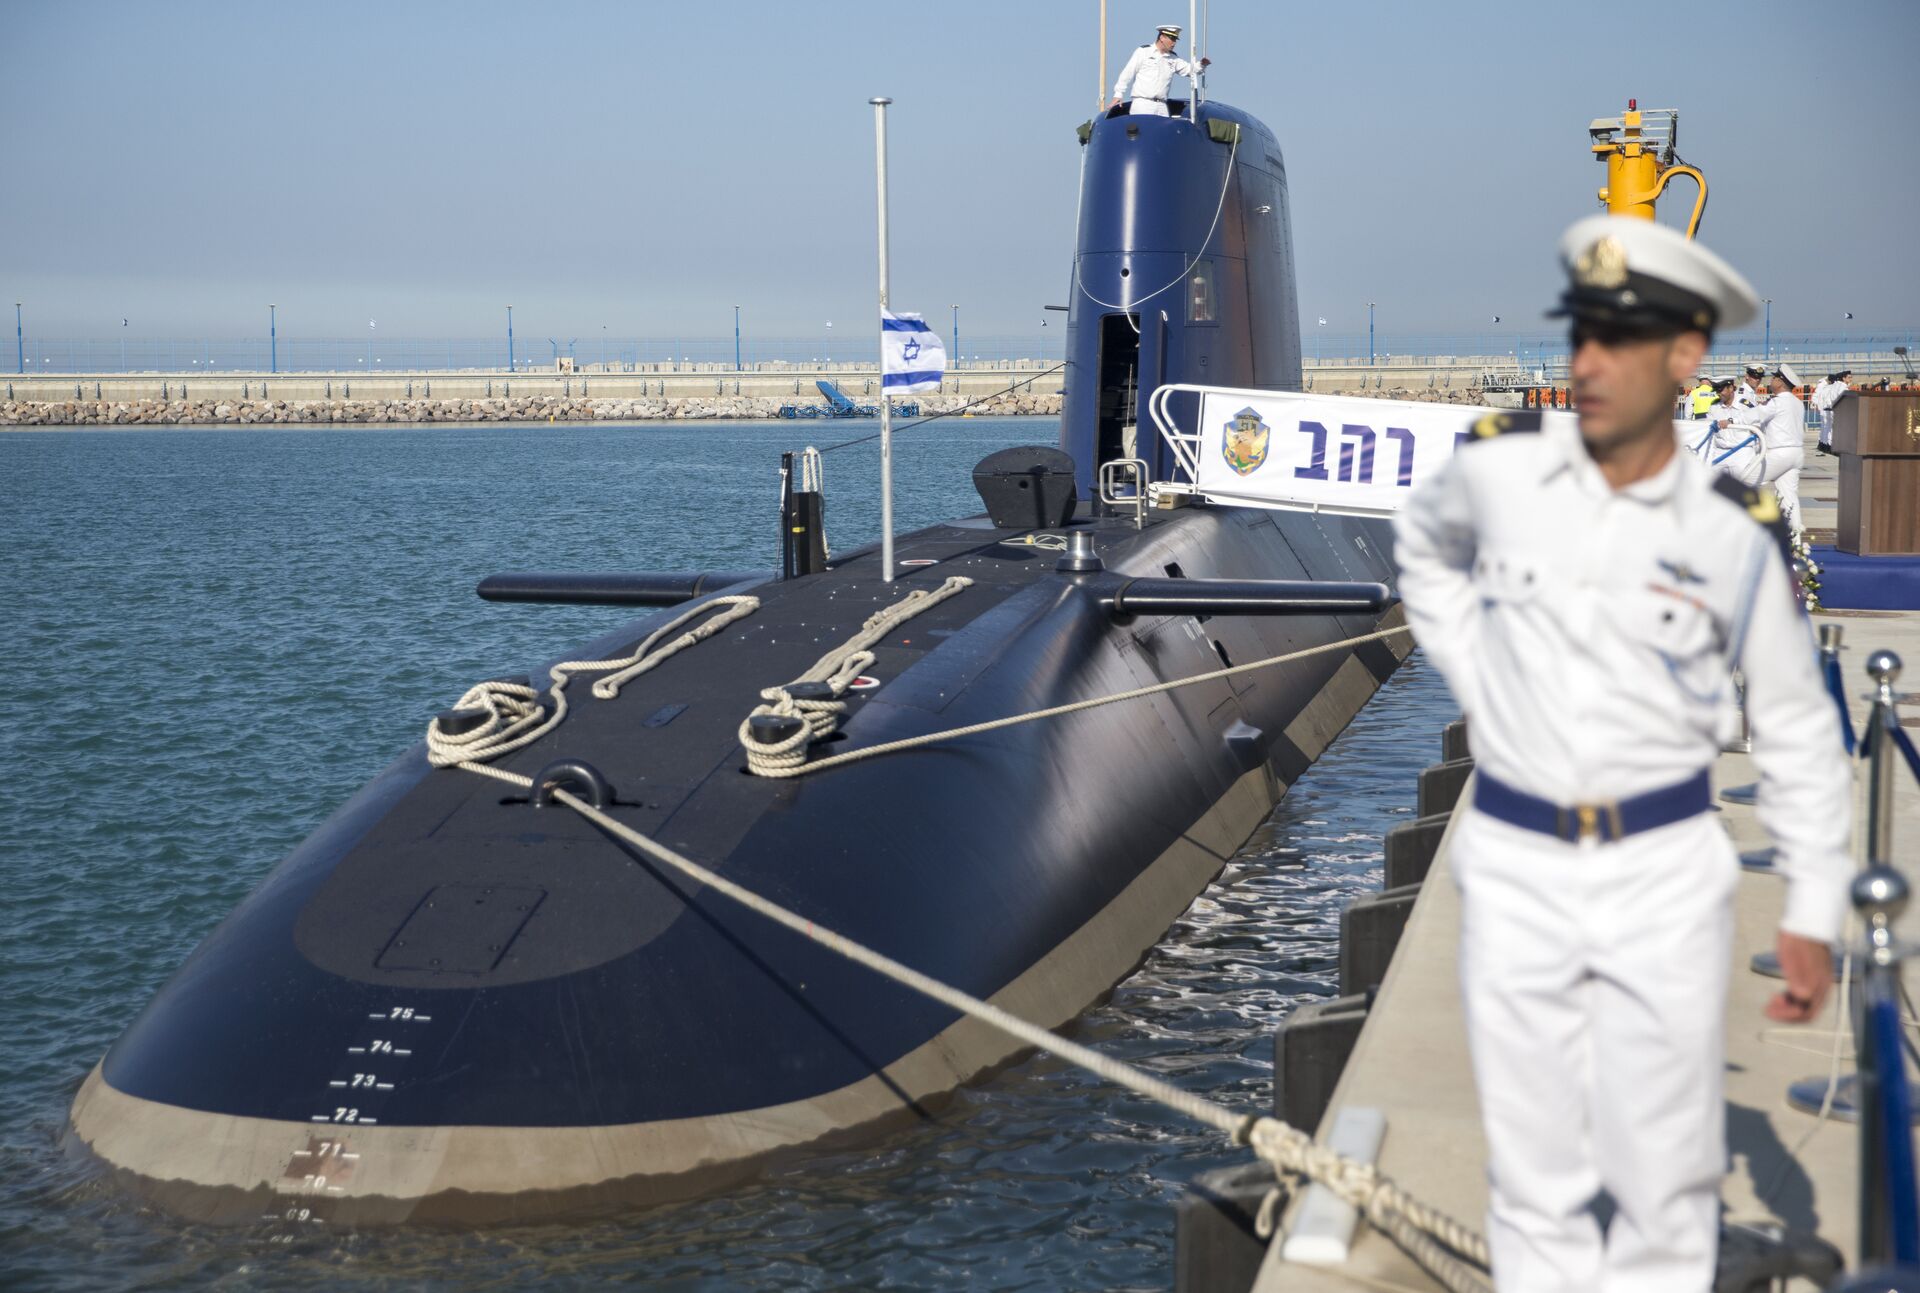 The German-made INS Rahav, the fifth Israeli Navy submarine, arrives at the military port of Haifa on January 12, 2016. In September 2015, Israel received delivery of the fourth Dolphin 2 class submarines from Germany. A third of the cost was funded by Germany as part of its military aid to Israel. The submarines, the most sophisticated in Israel's fleet, can be equipped with missiles armed with nuclear warheads. - Sputnik International, 1920, 23.01.2022